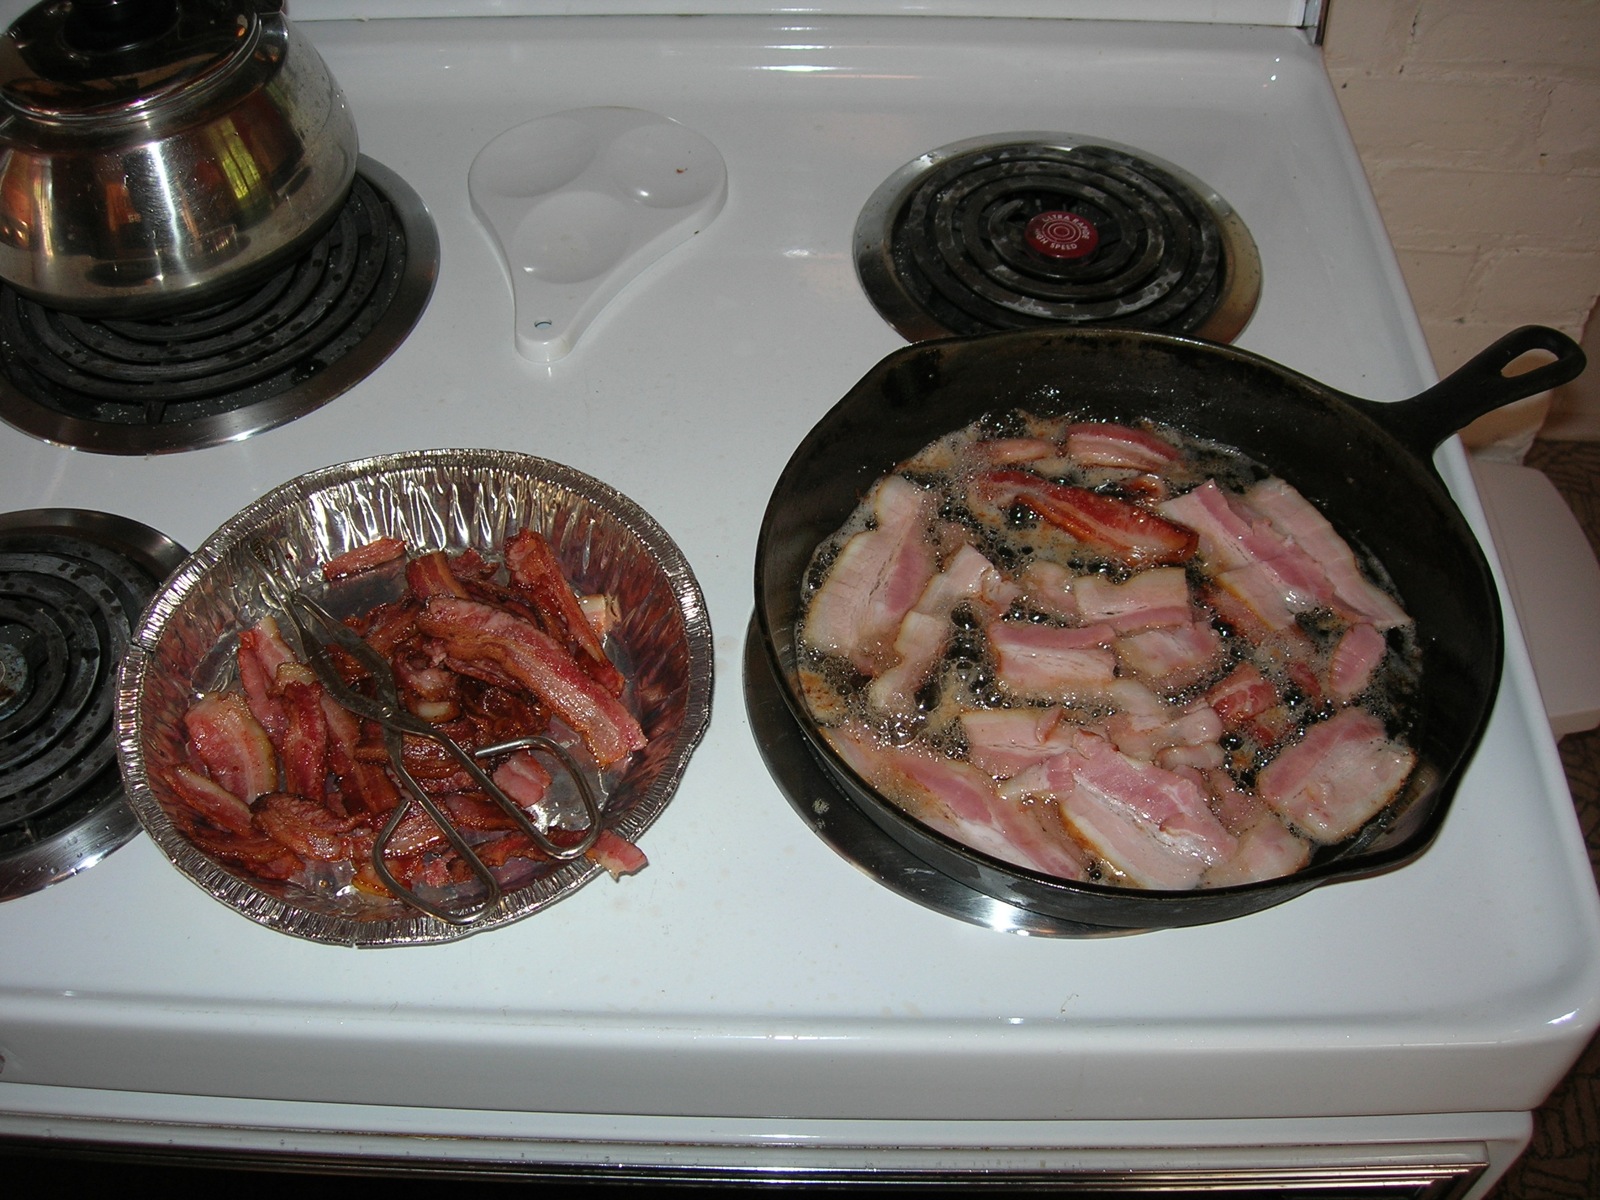 pans of raw chickens are prepared on the stove